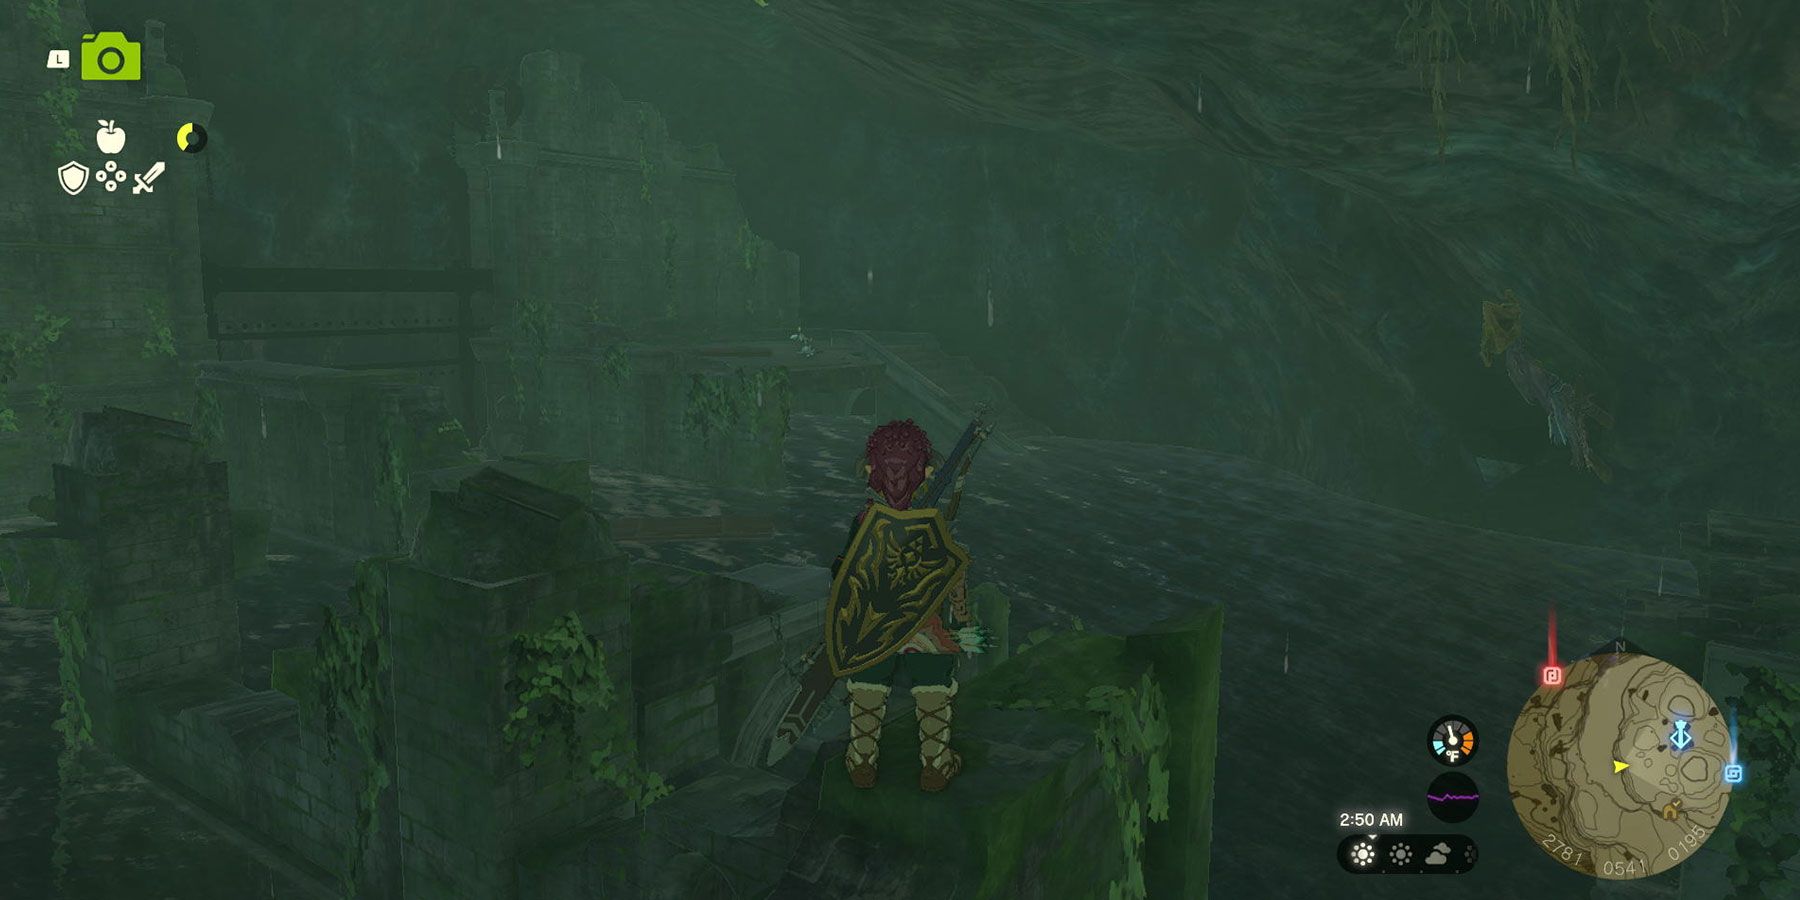 Climbing armor set location in Tears of the Kingdom.